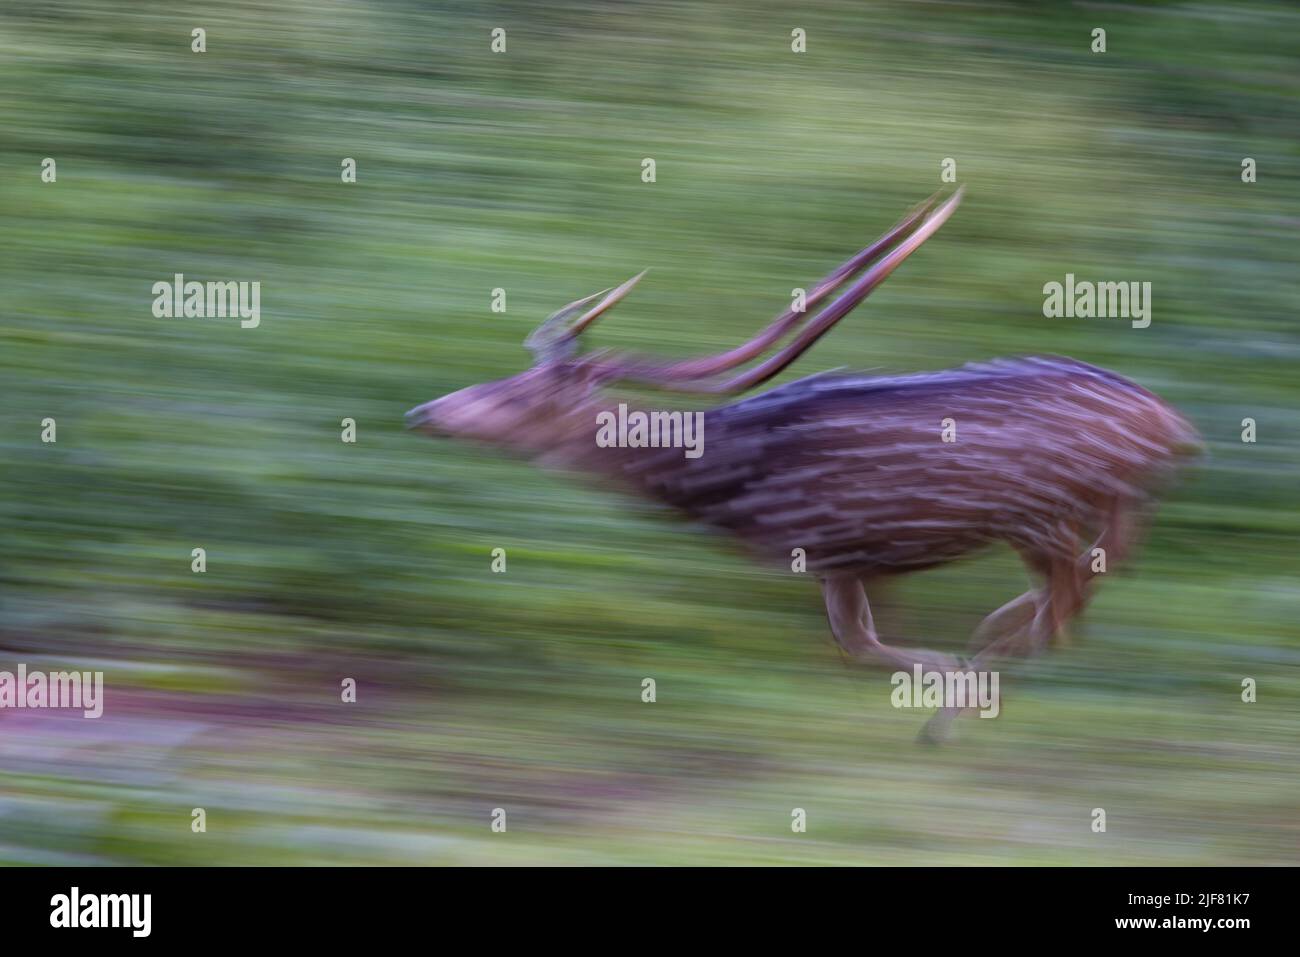 Abstract Image of a Spotted Deer Running Stock Photo